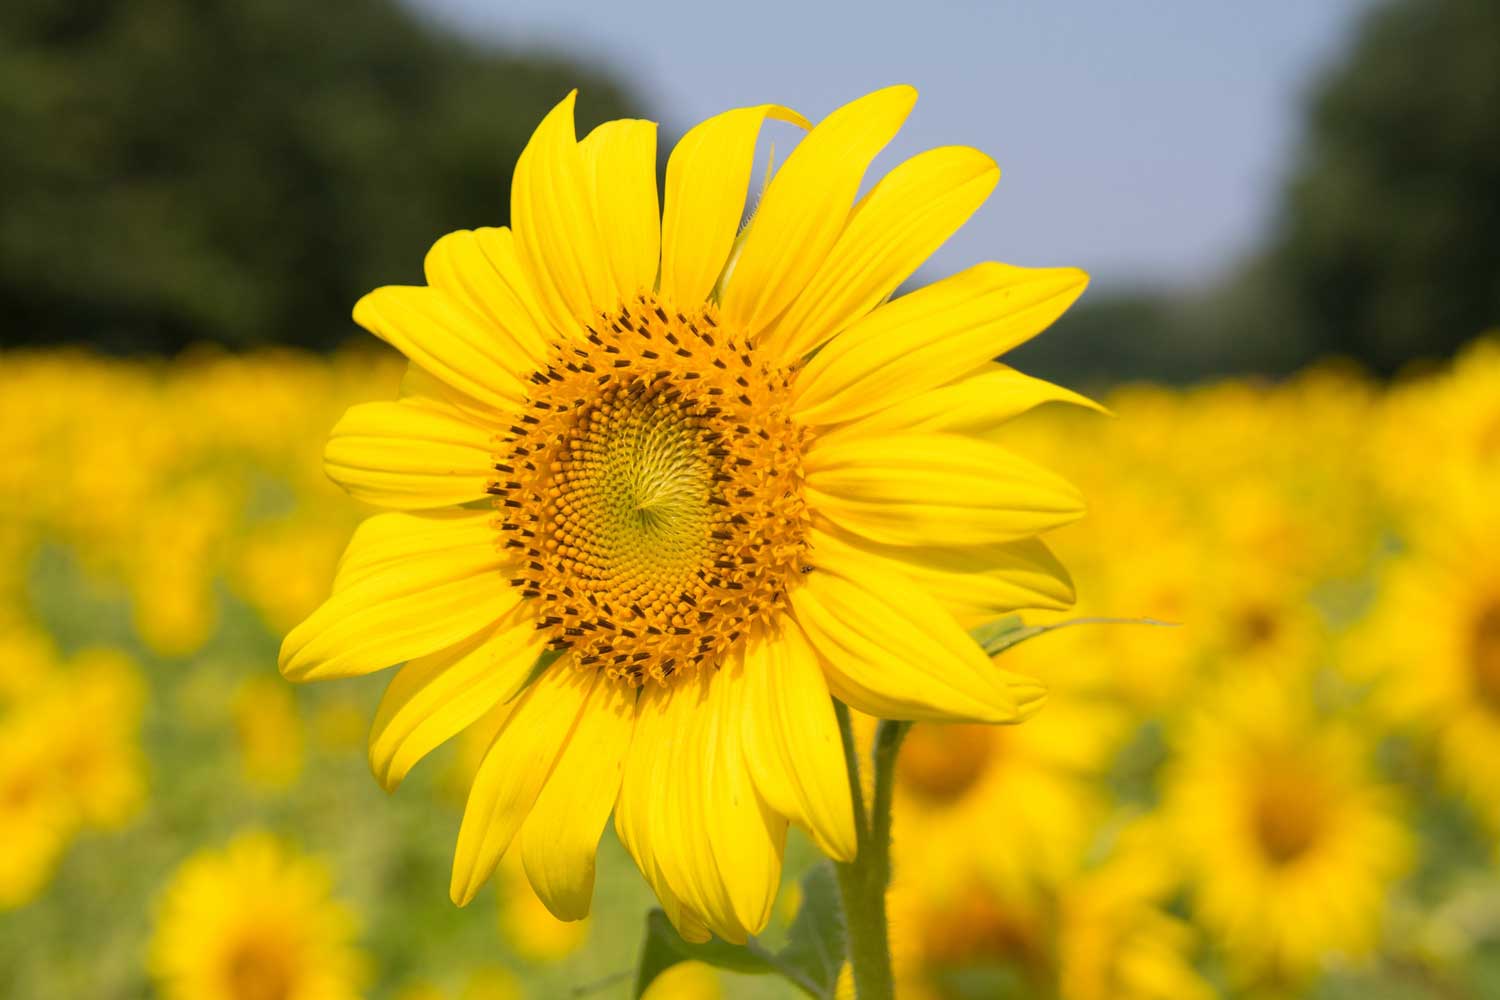 Image of a yellow sunflower in a field